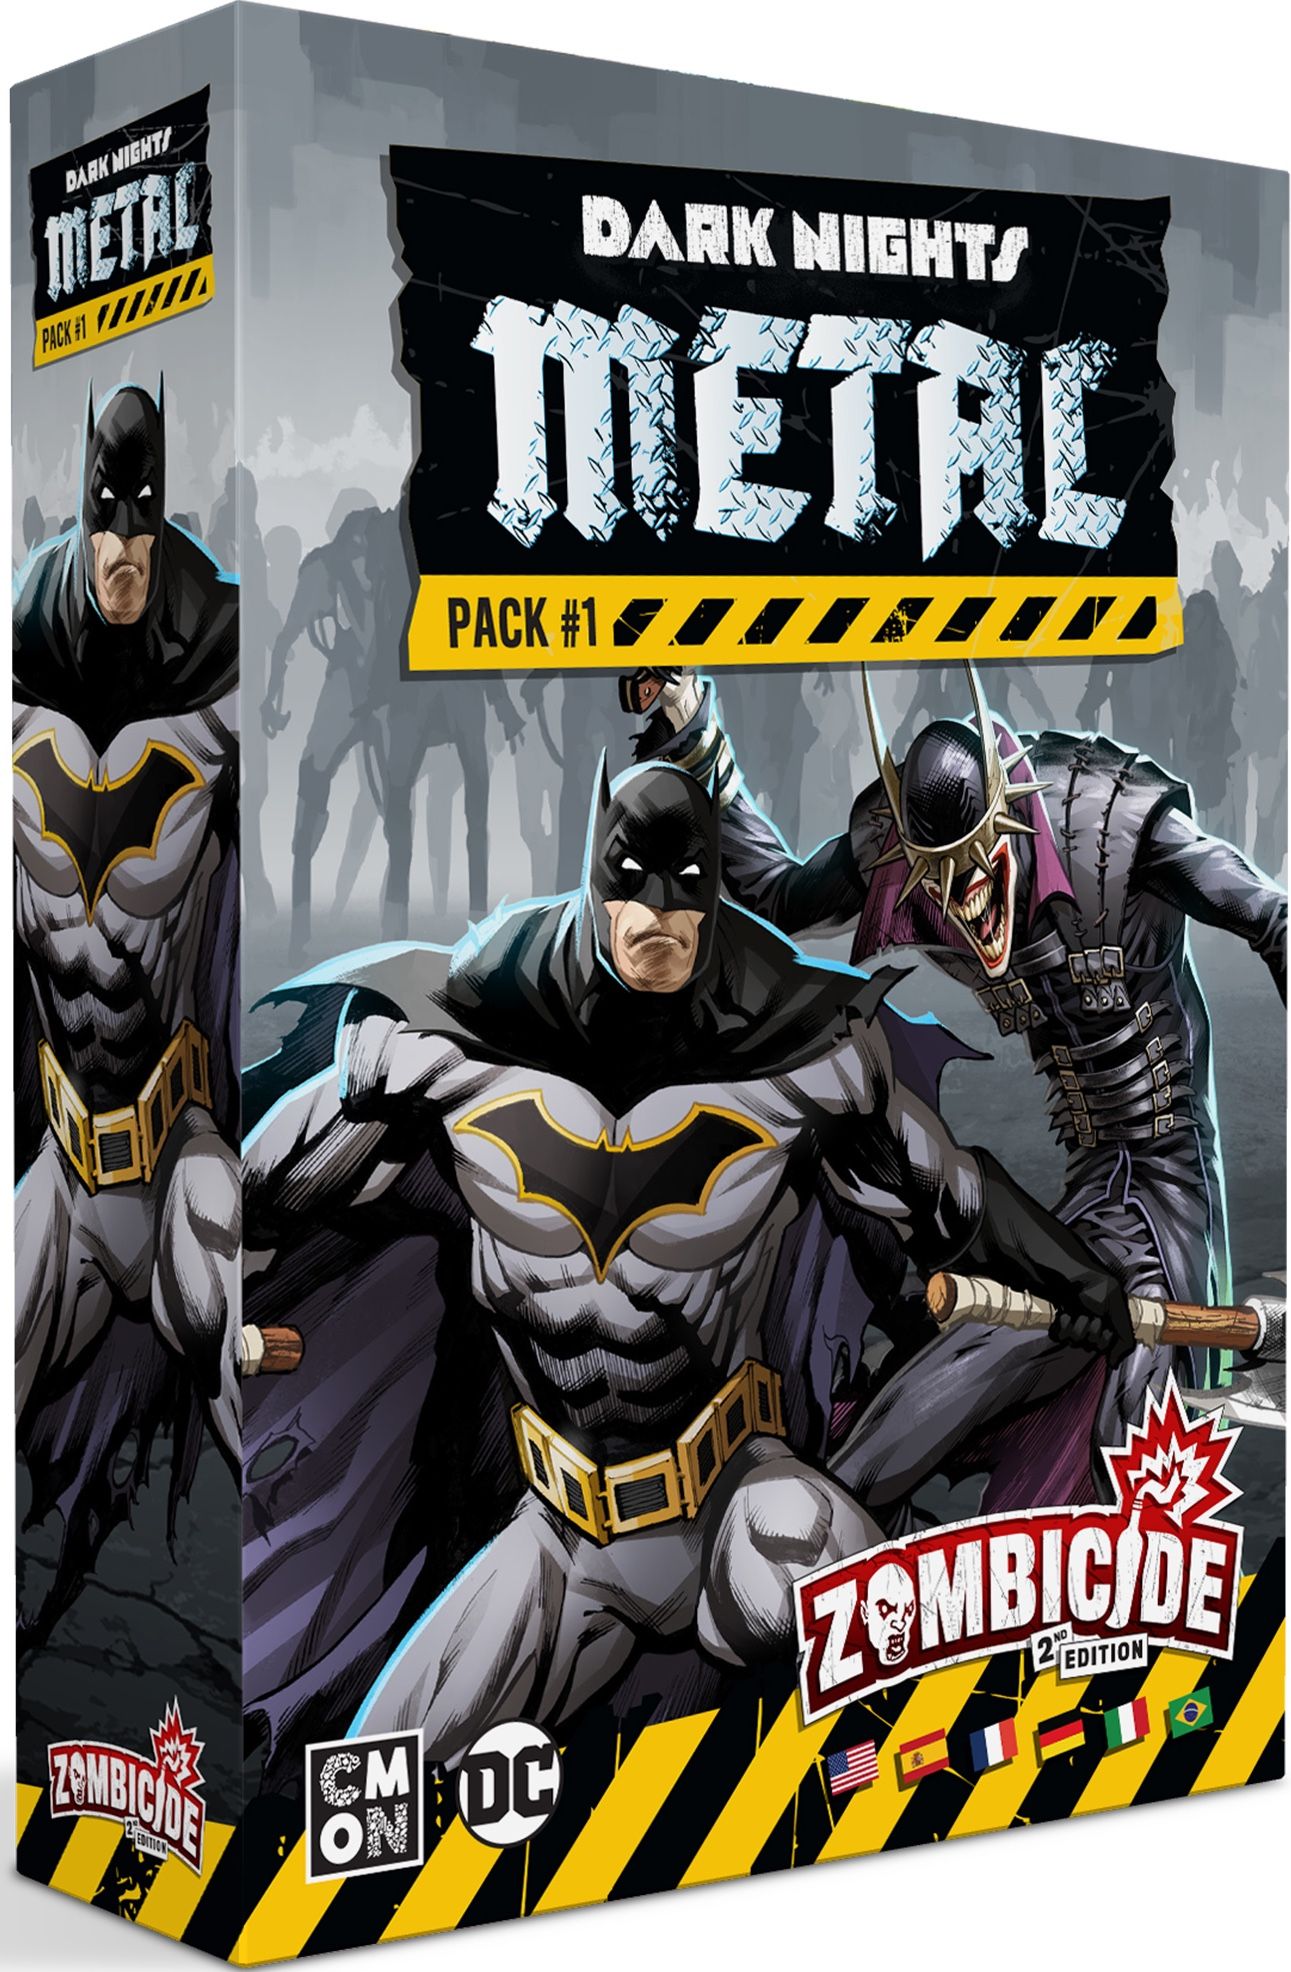 Cool Mini Or Not Zombicide: 2nd Edition – Dark Nights Metal: Pack #1